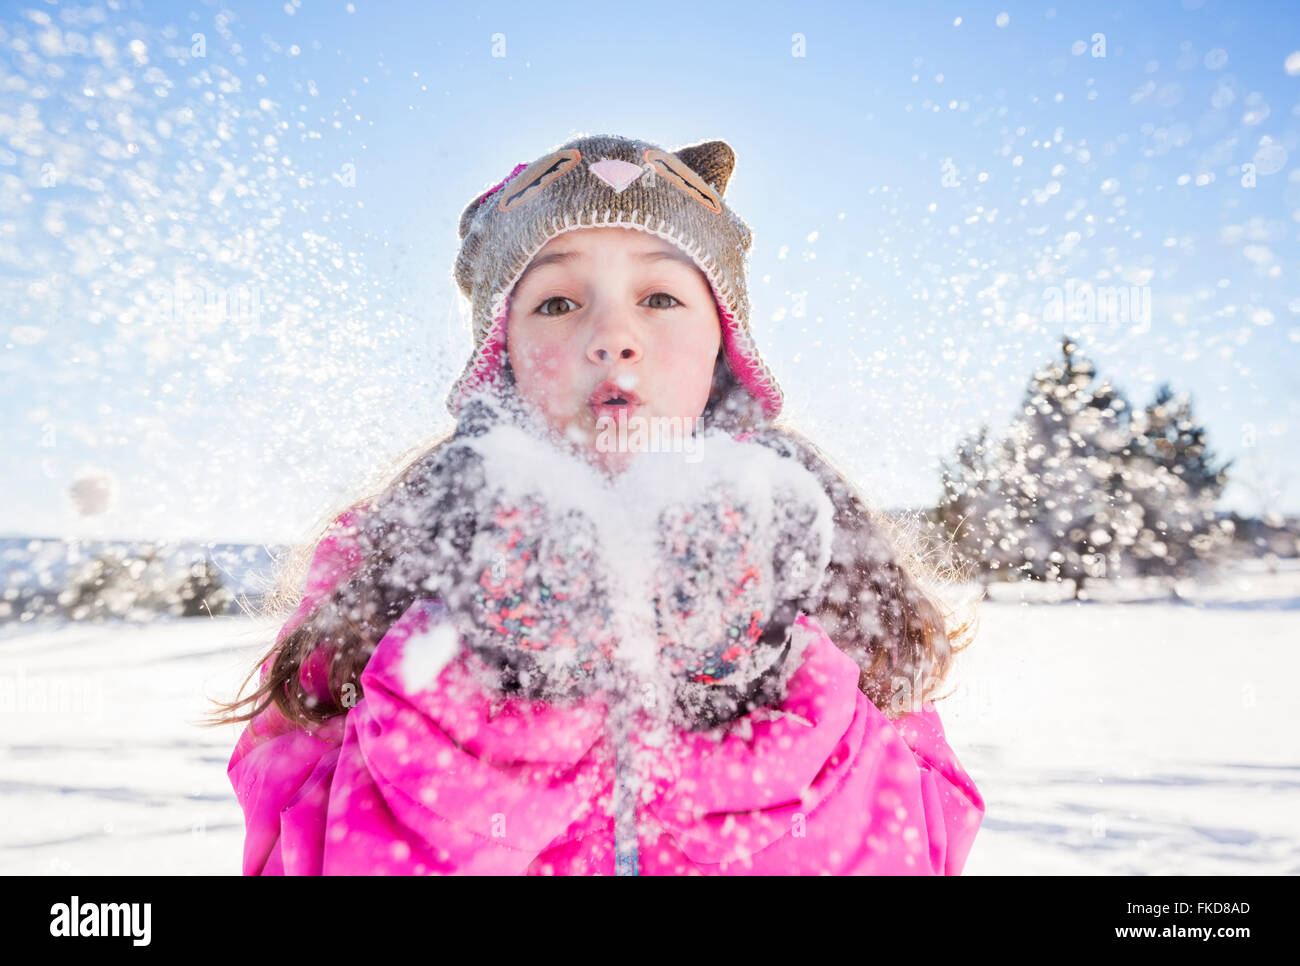 Girl (10-11) in pink jacket blowing snow Stock Photo